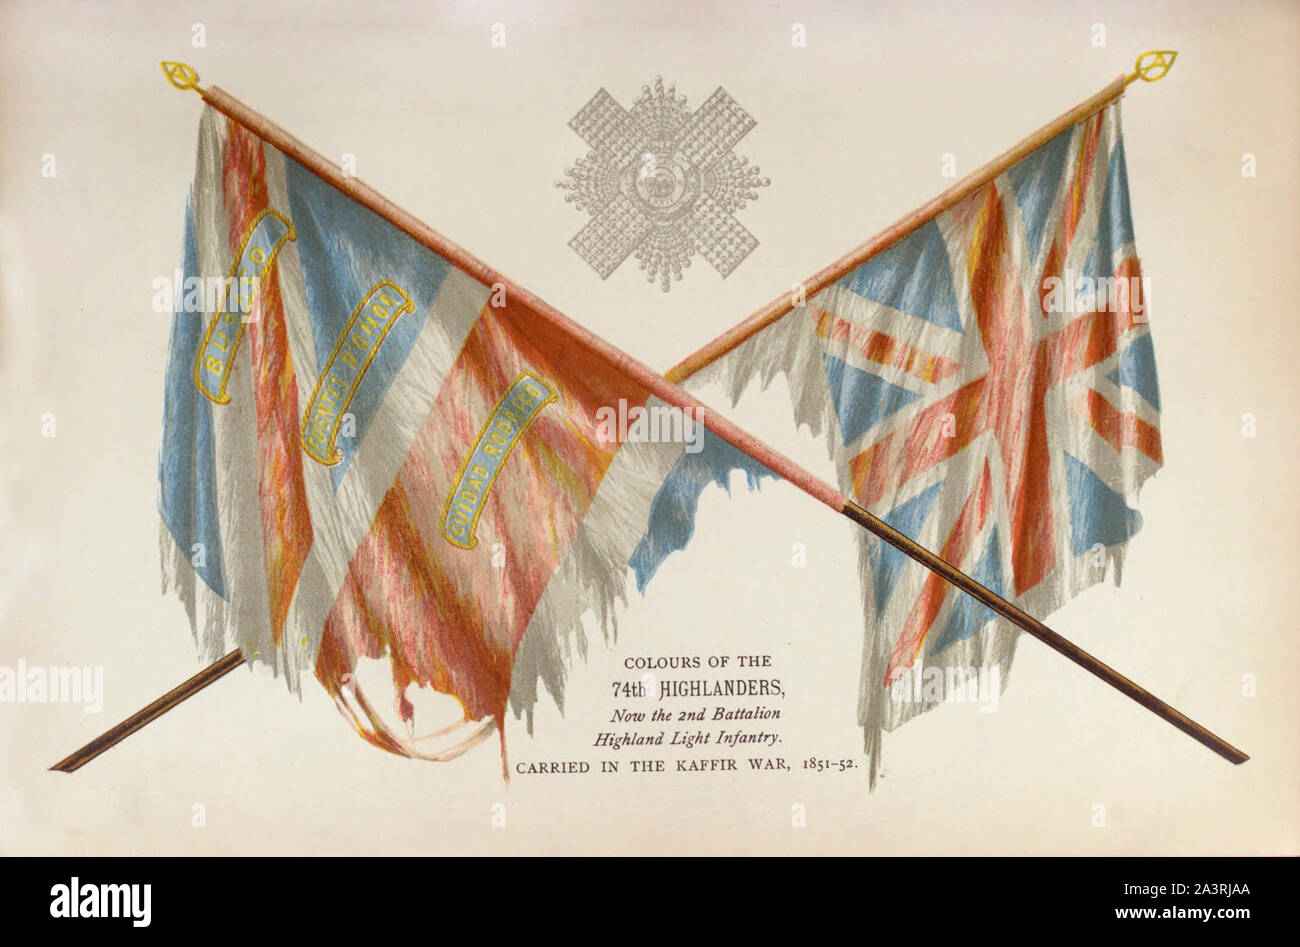 Colours of the 74th Highlanders now 2nd Battalion Highland Light Infantry. Carried in the Kaffir War. 1851-1852. Stock Photo